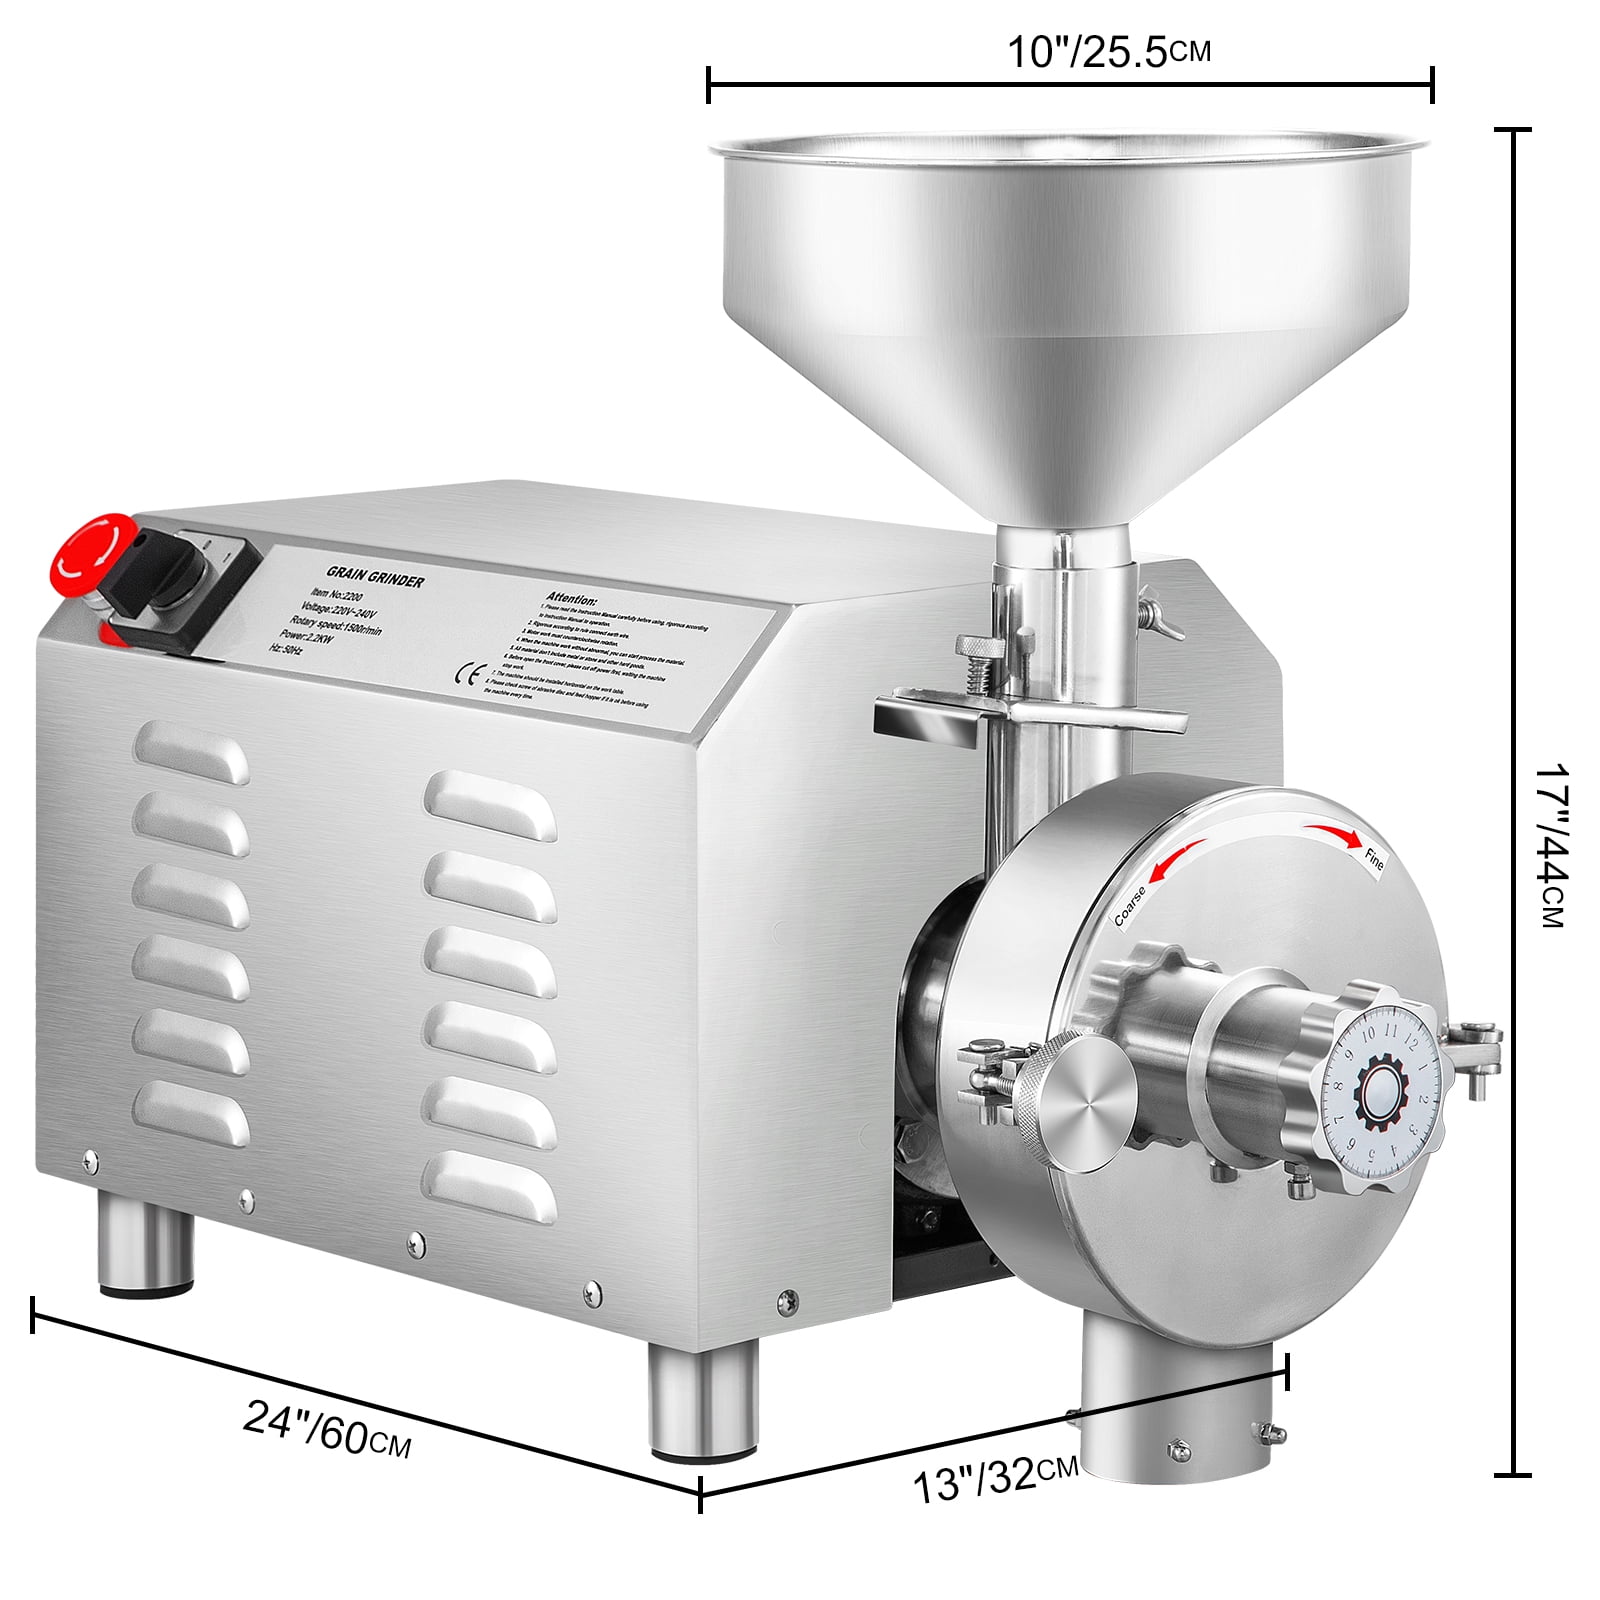 Details about   Electric Grinder Mill Grain Corn 3000W Wheat Feed/Flour Wet&Dry Cereal Machine 